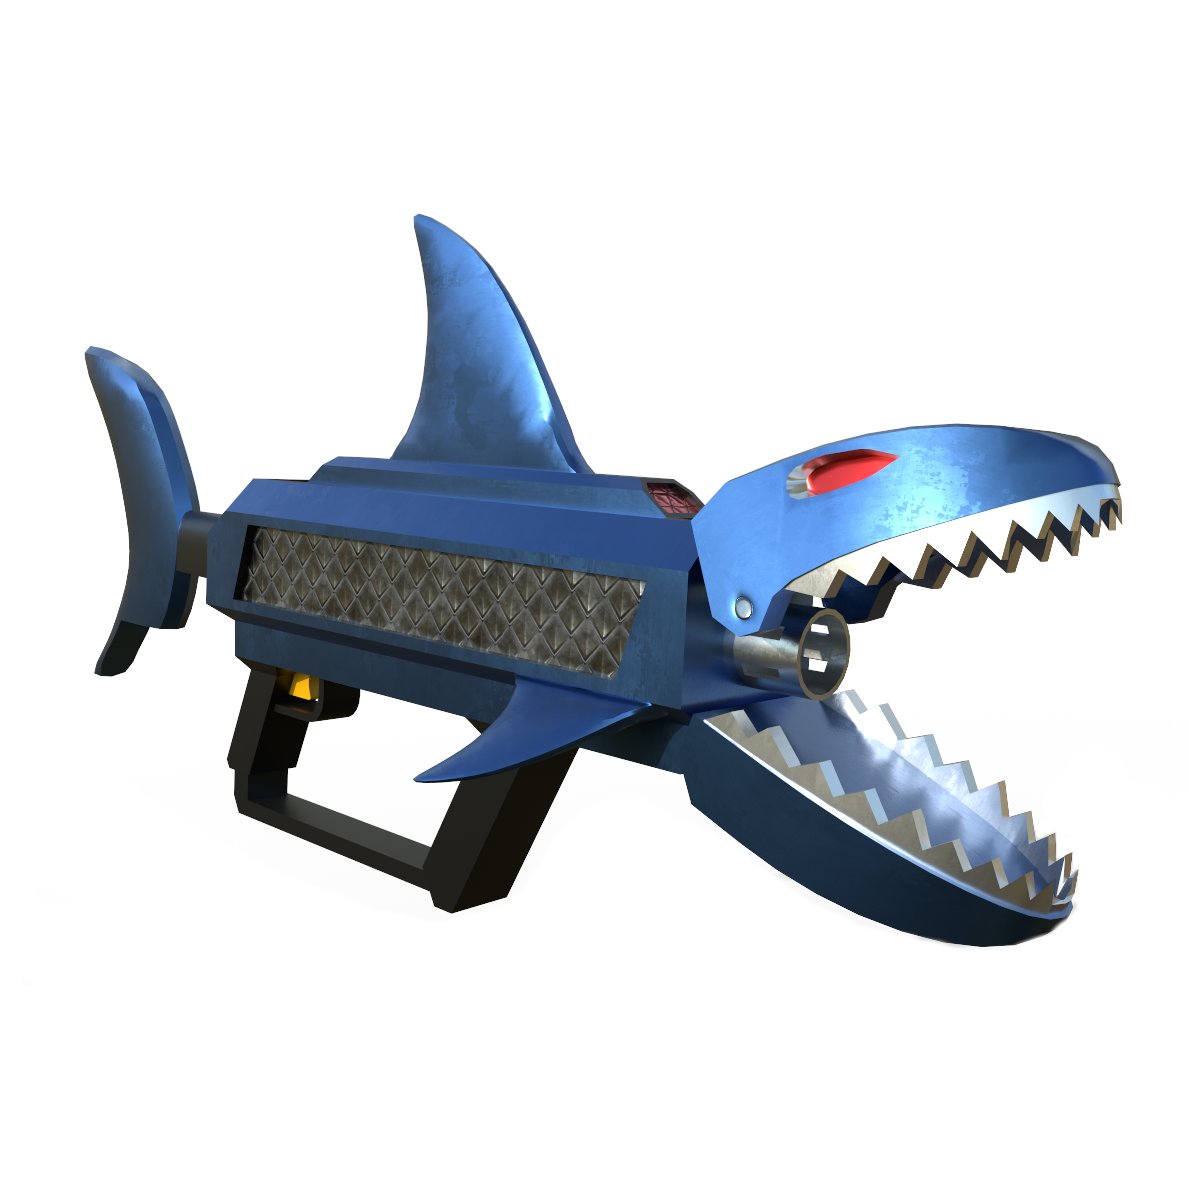 Simon On Twitter Here S A Render Of The Shark Blaster Featured In This Weeks Sharkbite Update The Jaws Open And Close When Fired In Game Https T Co Wha6z4ysht - roblox sharkbite codes 2020 august